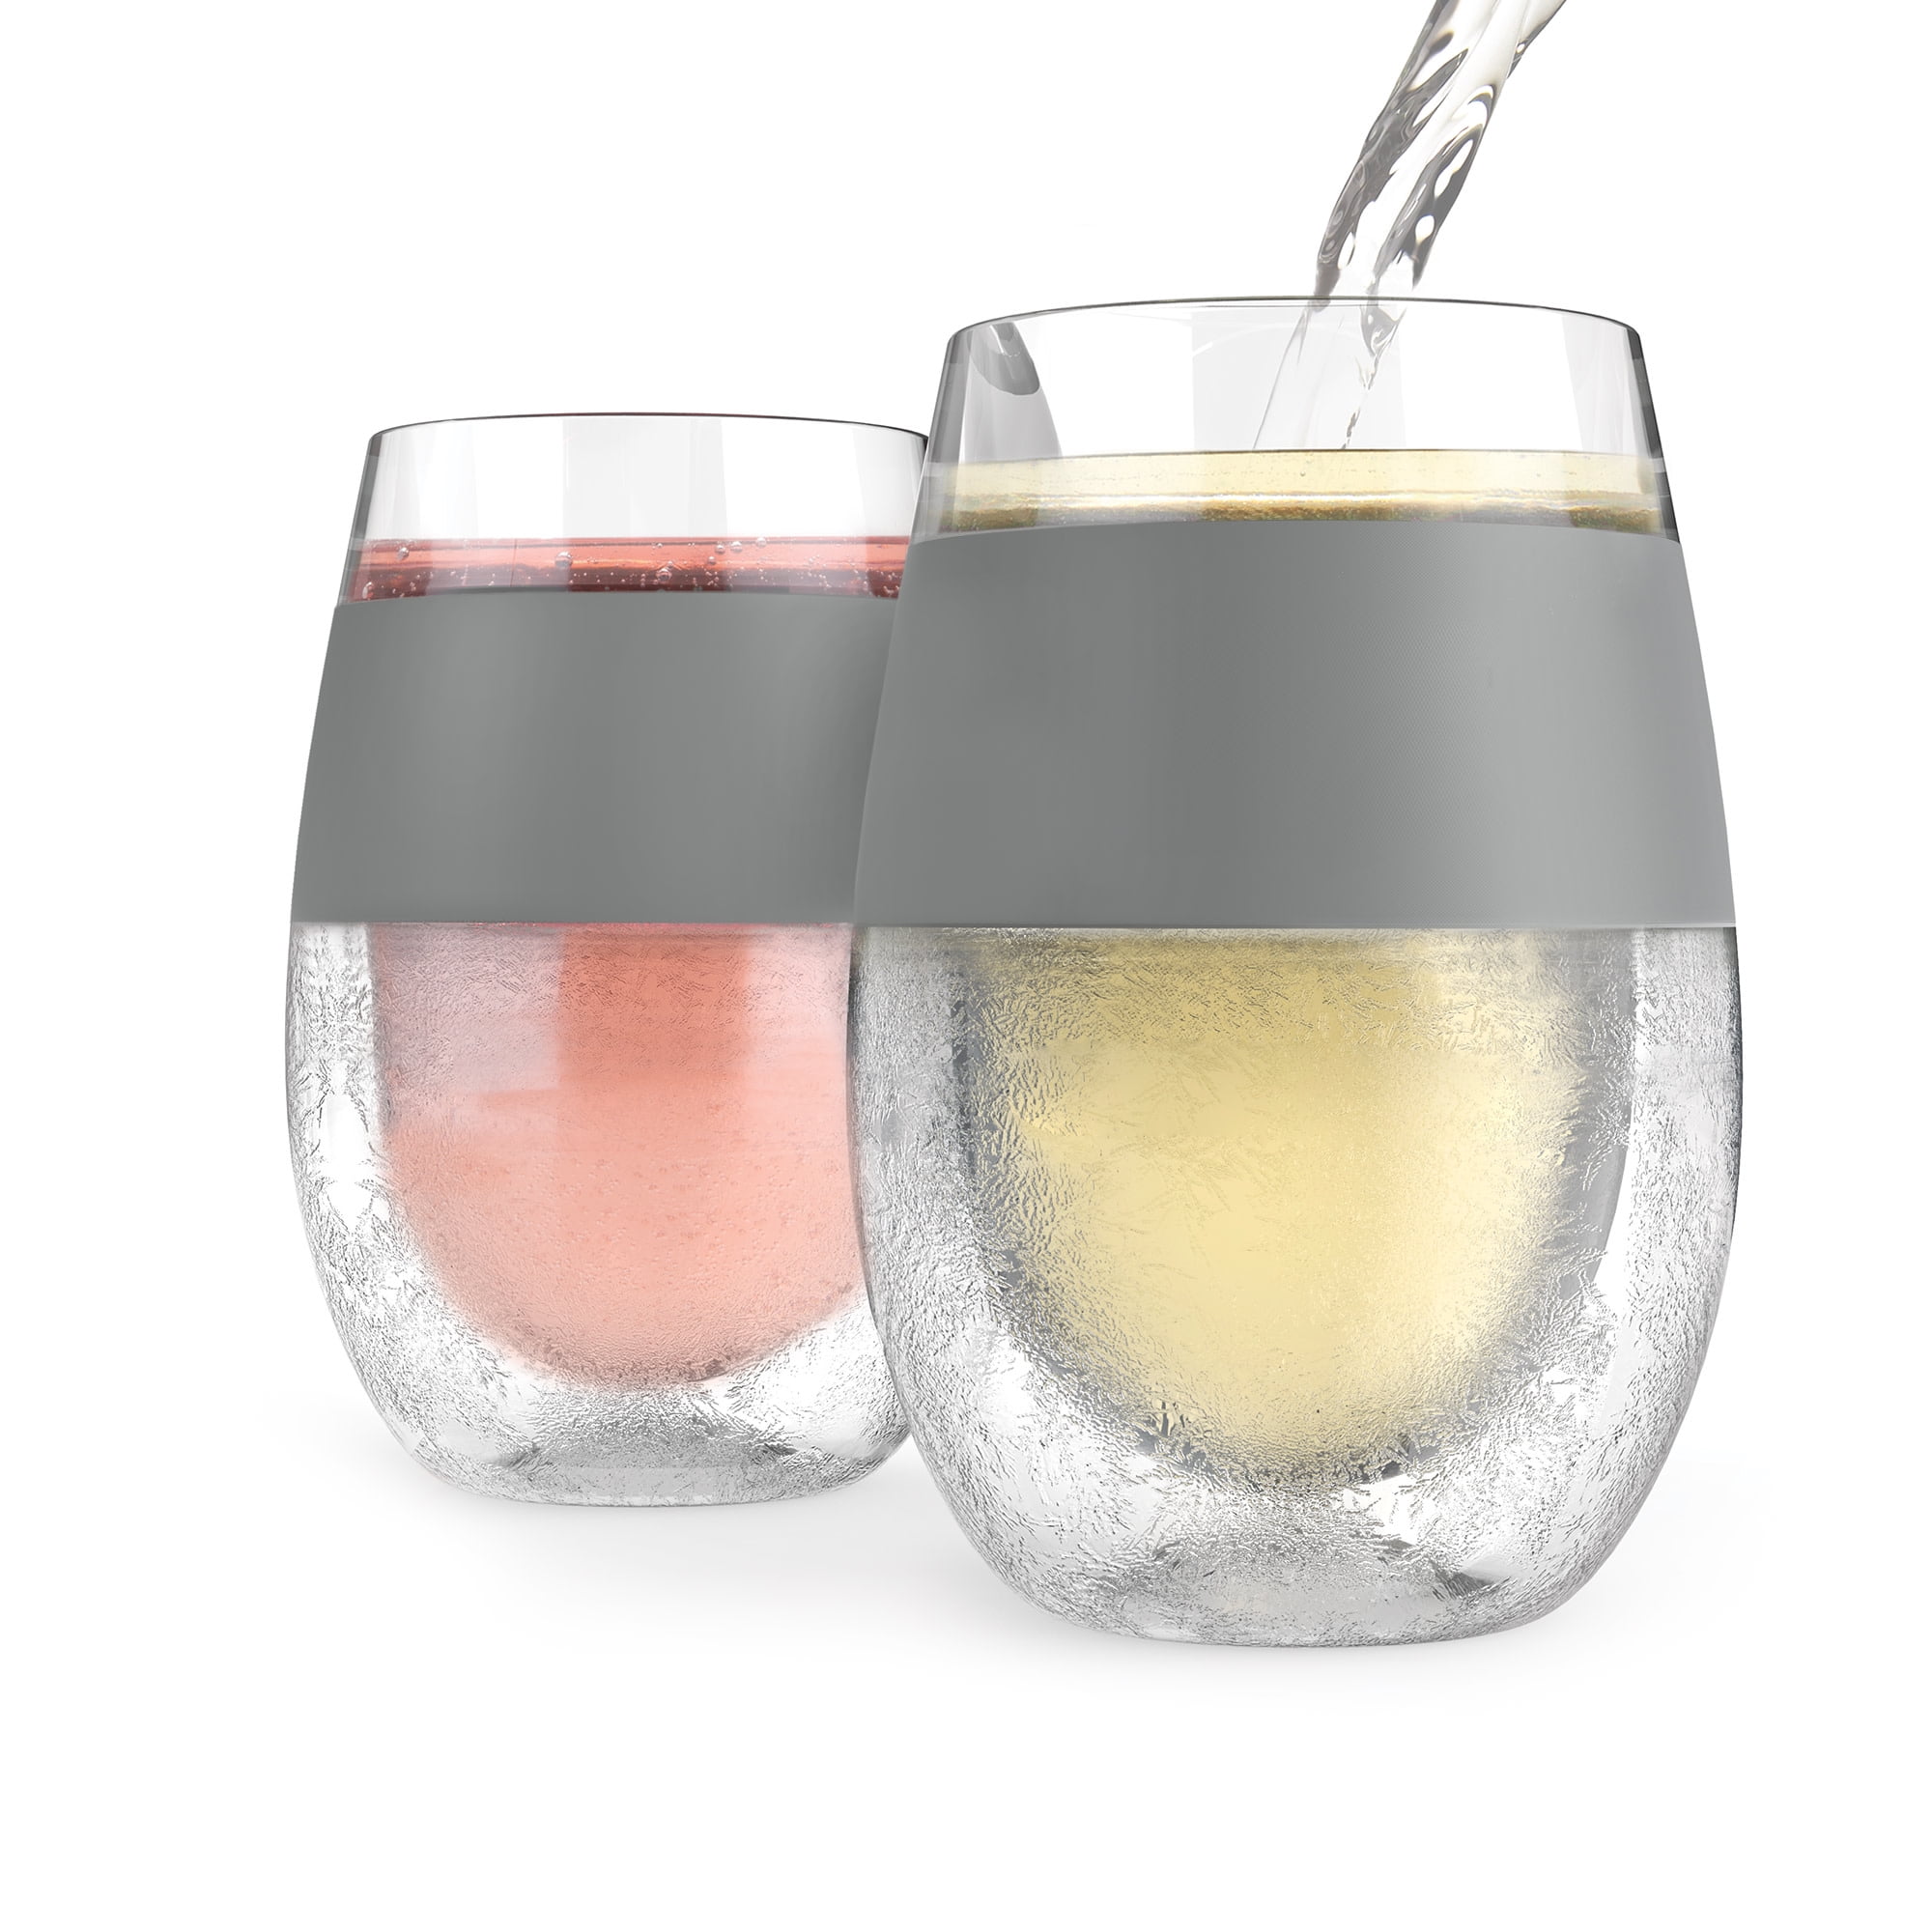 Giant Wine Glass Cocktail Drinks Glasses Set of 6 Holds A Whole Bottle 75cl 